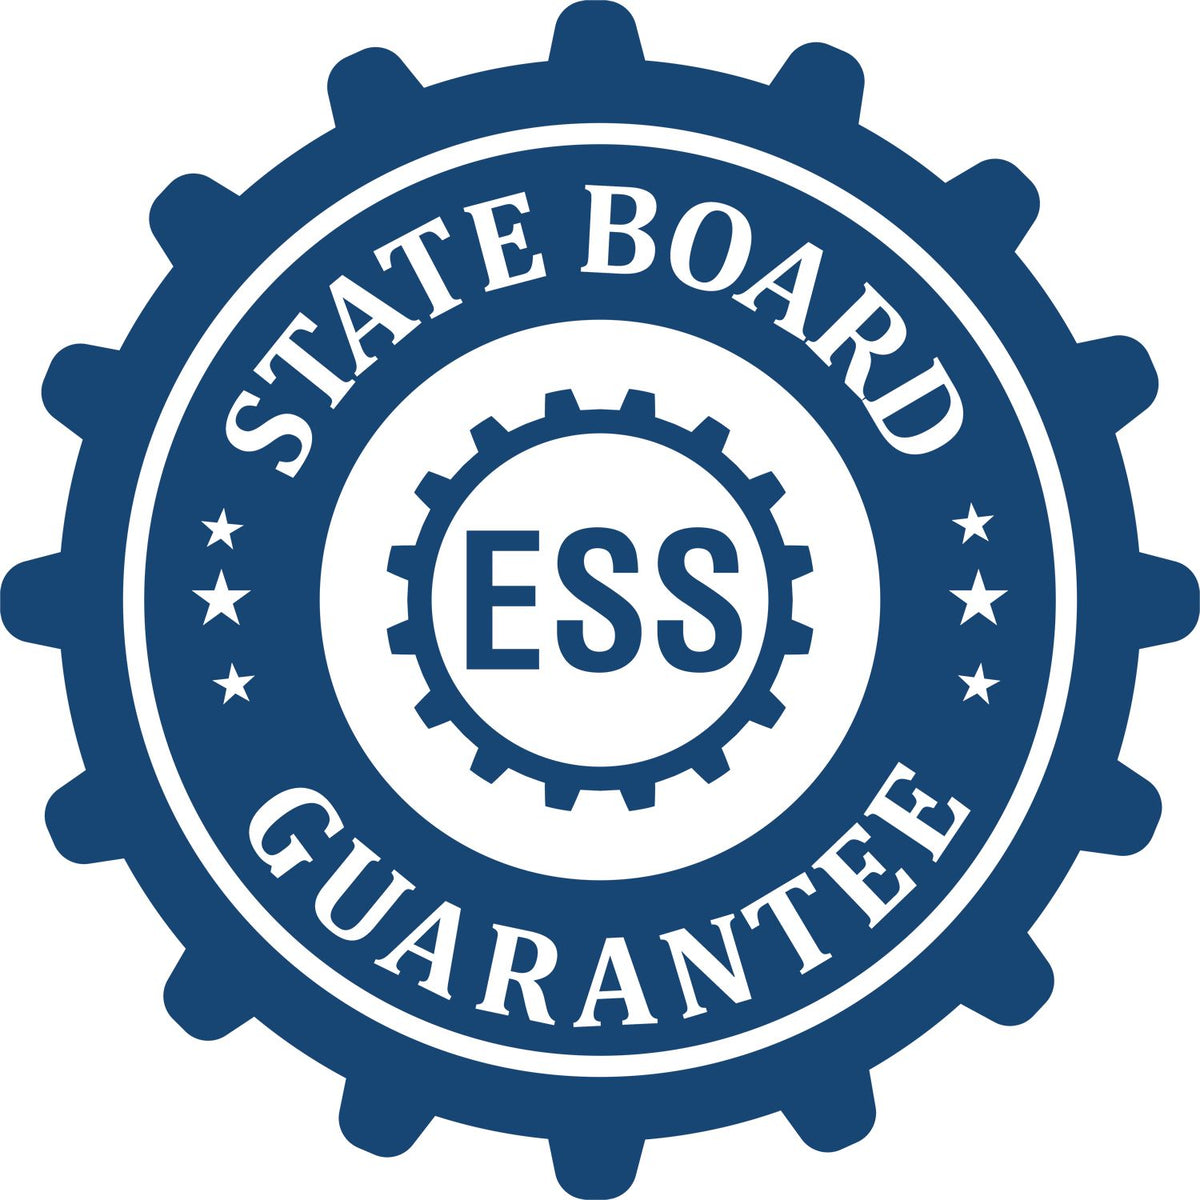 An emblem in a gear shape illustrating a state board guarantee for the Digital Georgia PE Stamp and Electronic Seal for Georgia Engineer product.